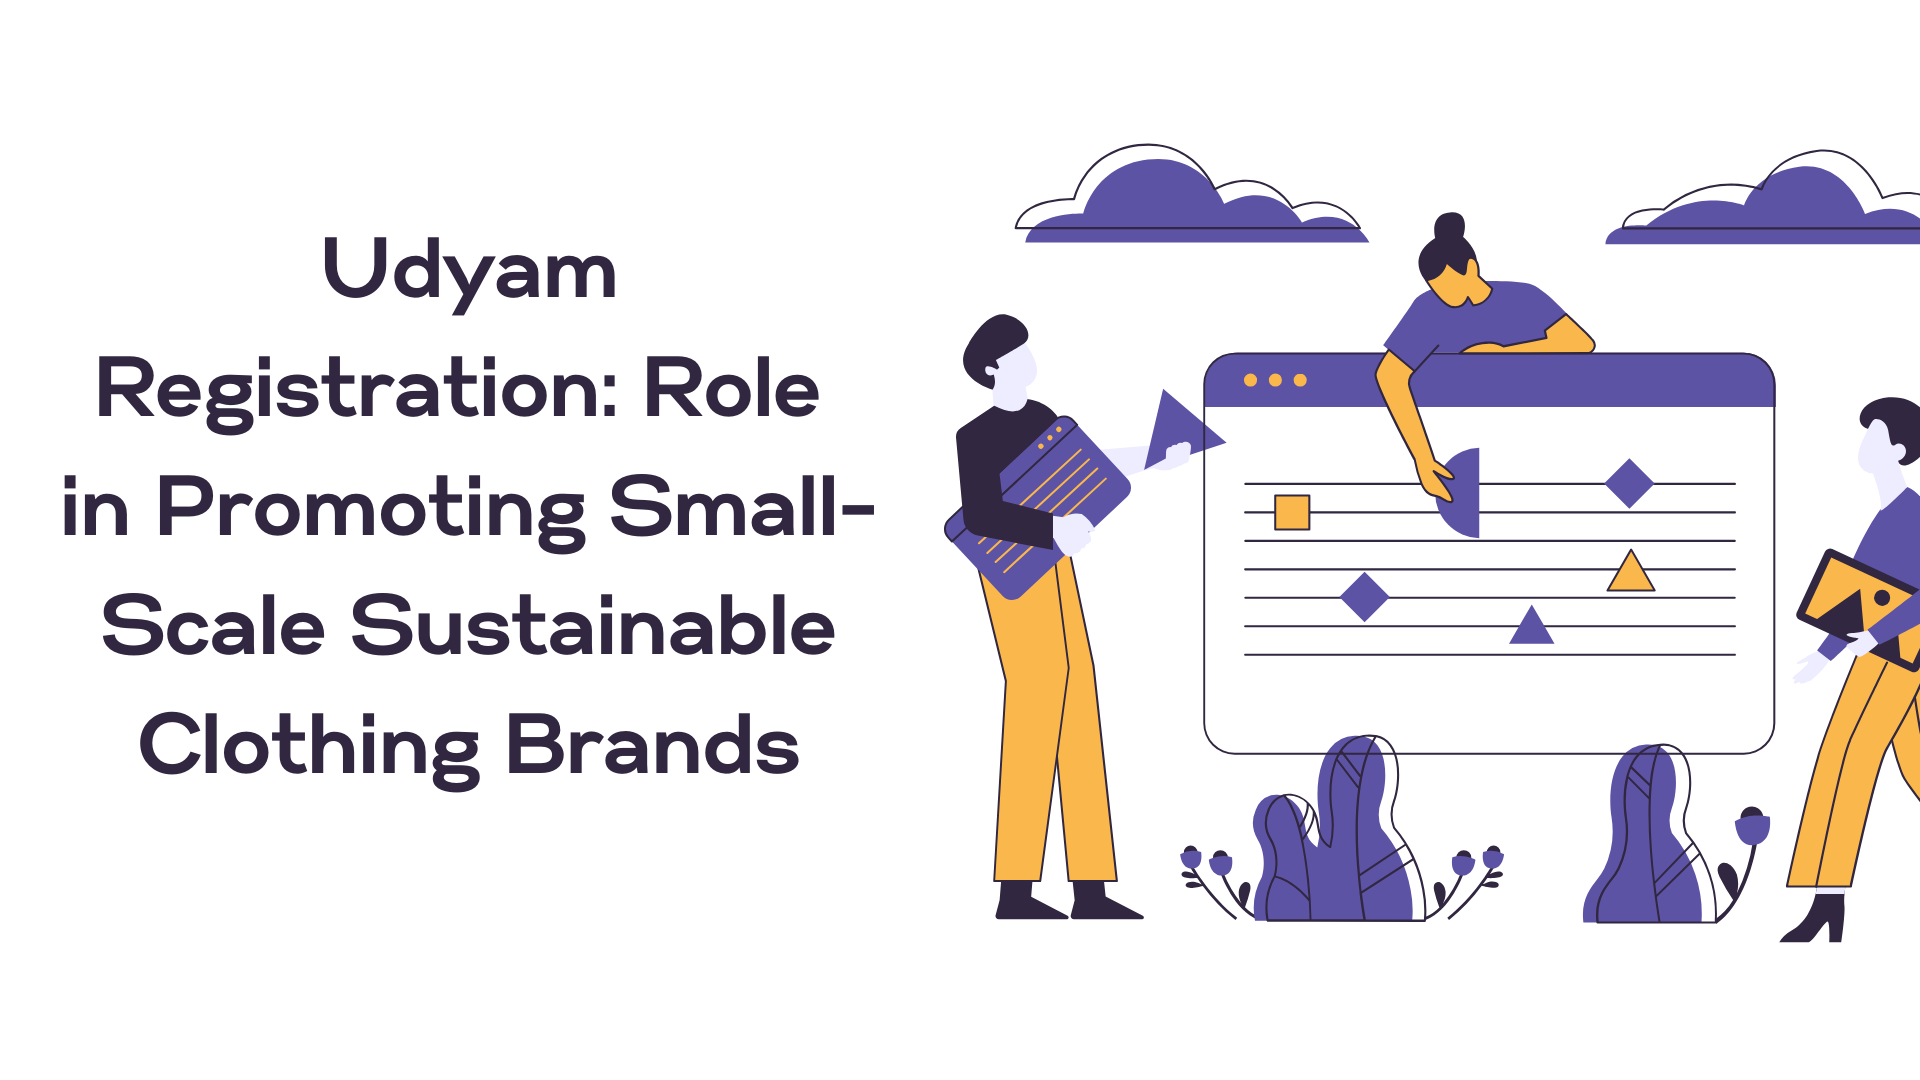 Udyam Registration: Role in Promoting Small Scale Sustainable Clothing Brands